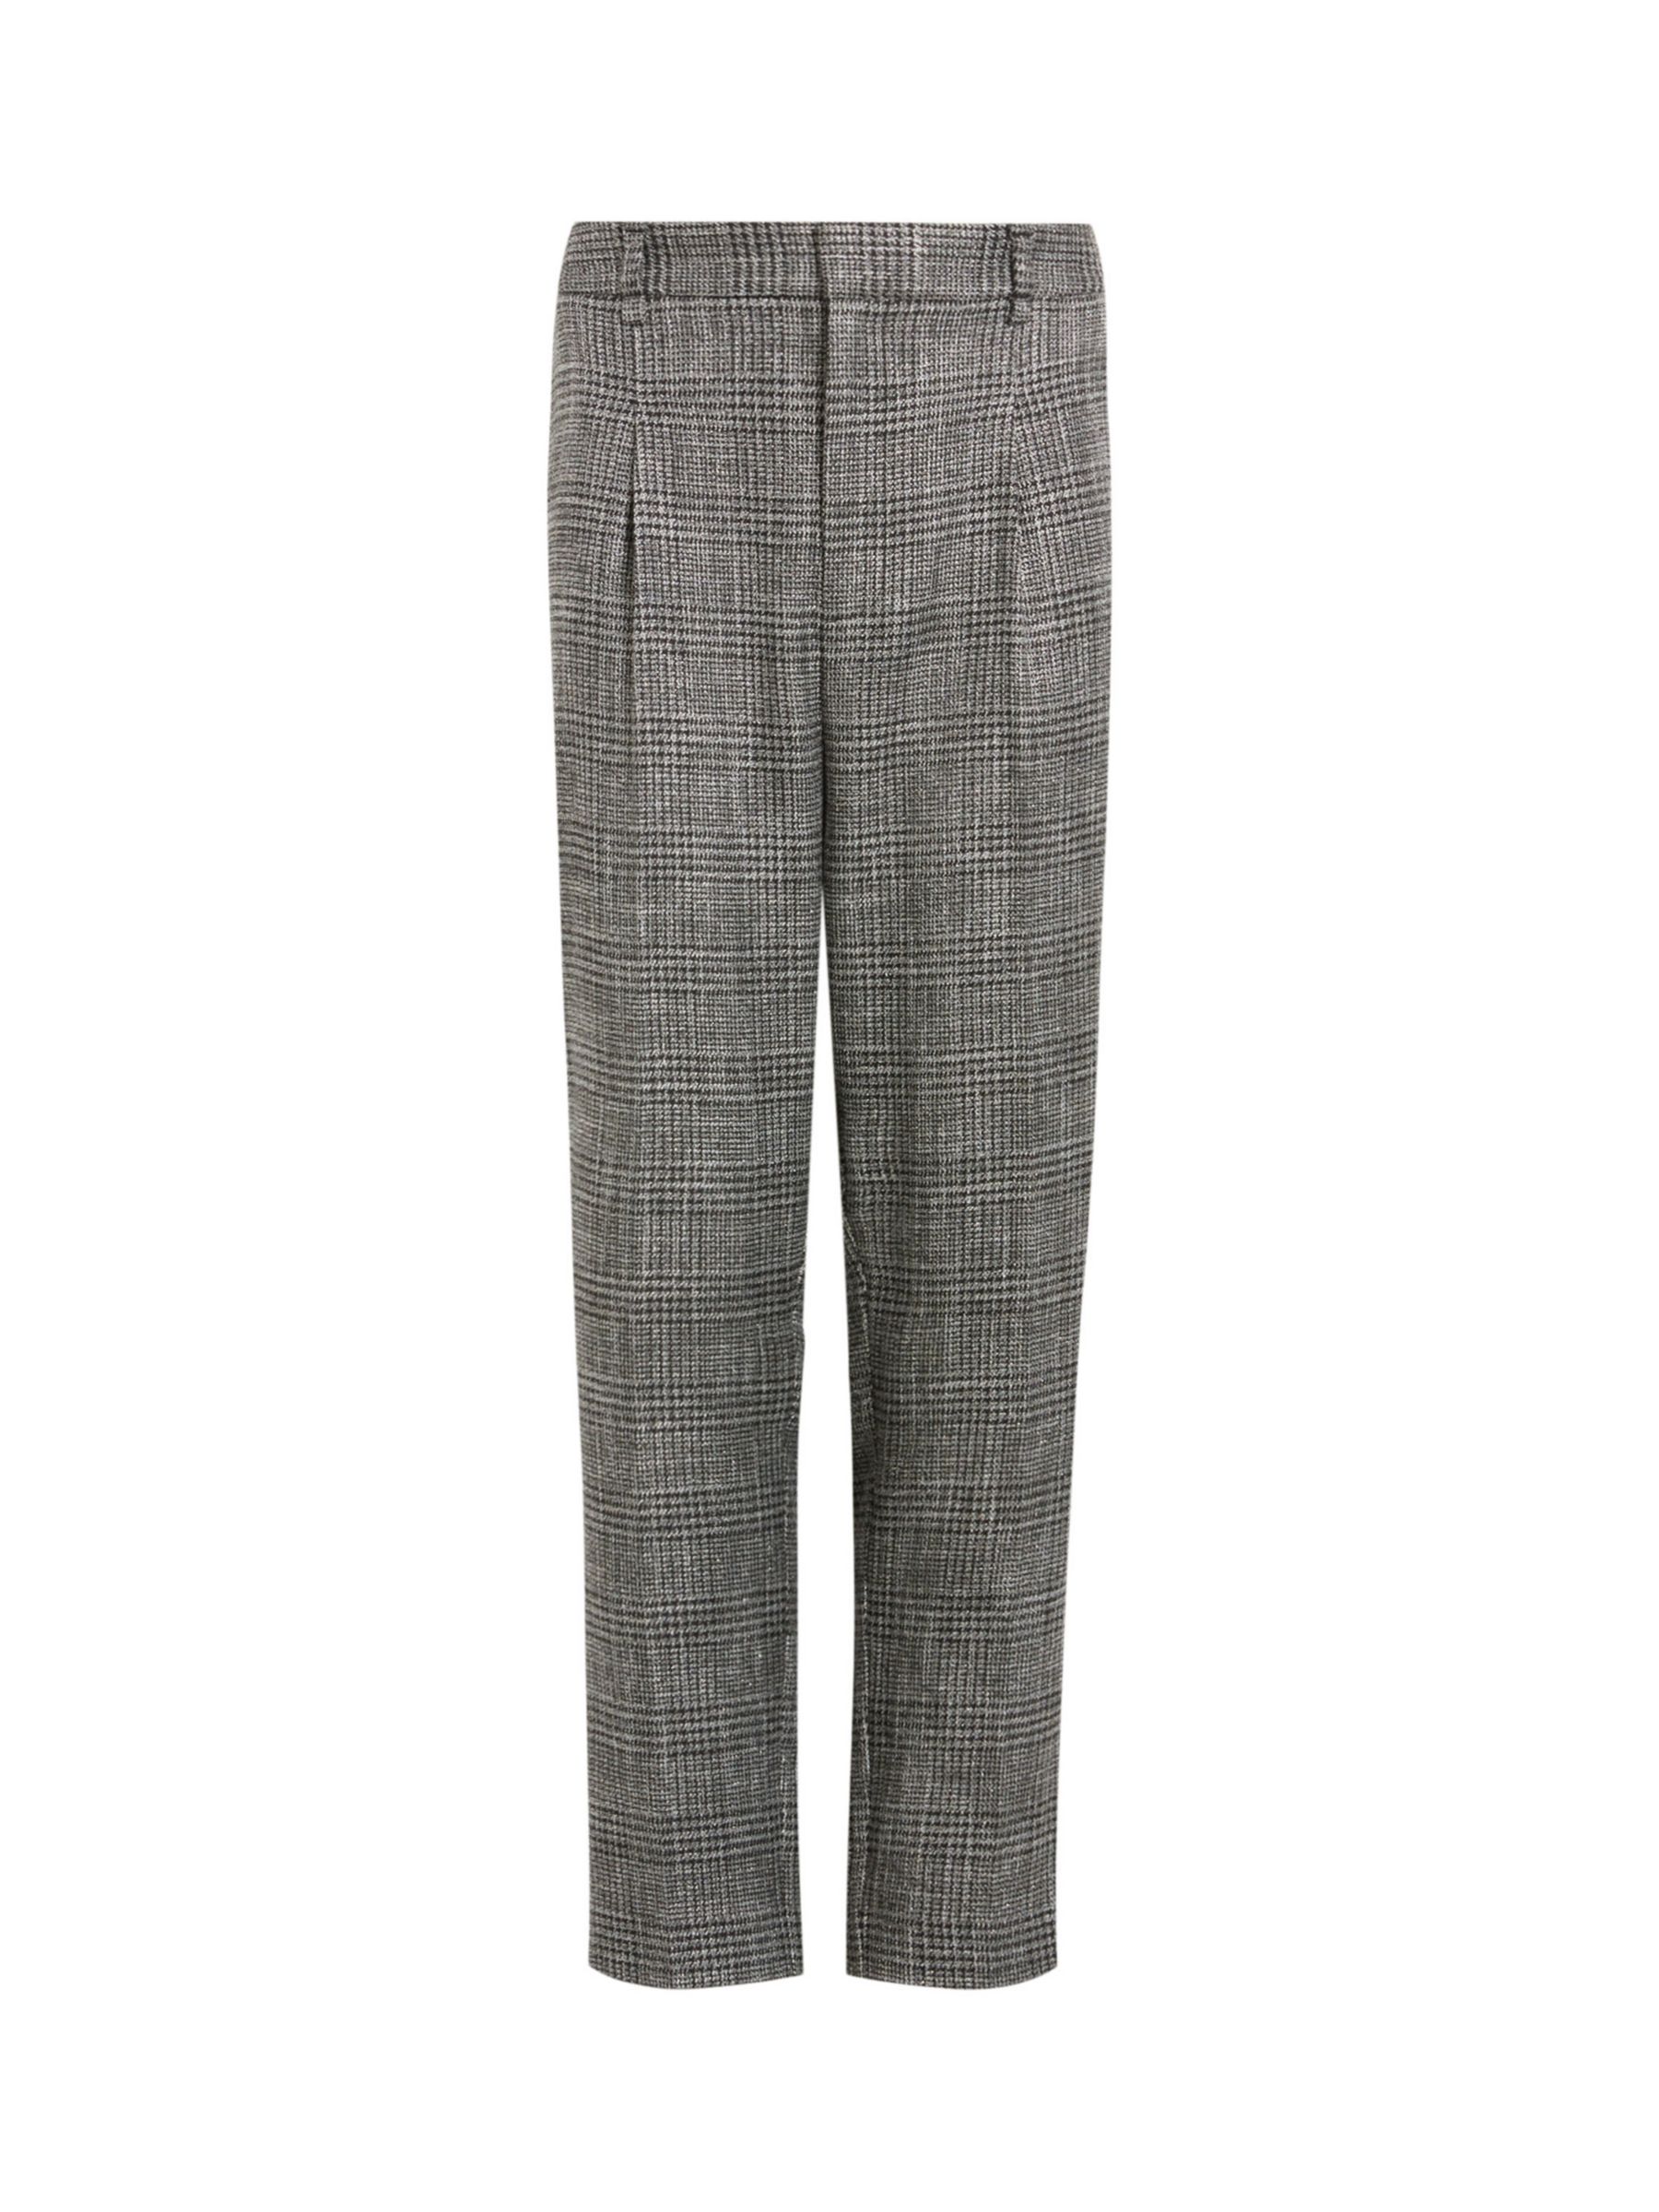 AllSaints Astrid Sparkle Check Trousers, Grey at John Lewis & Partners